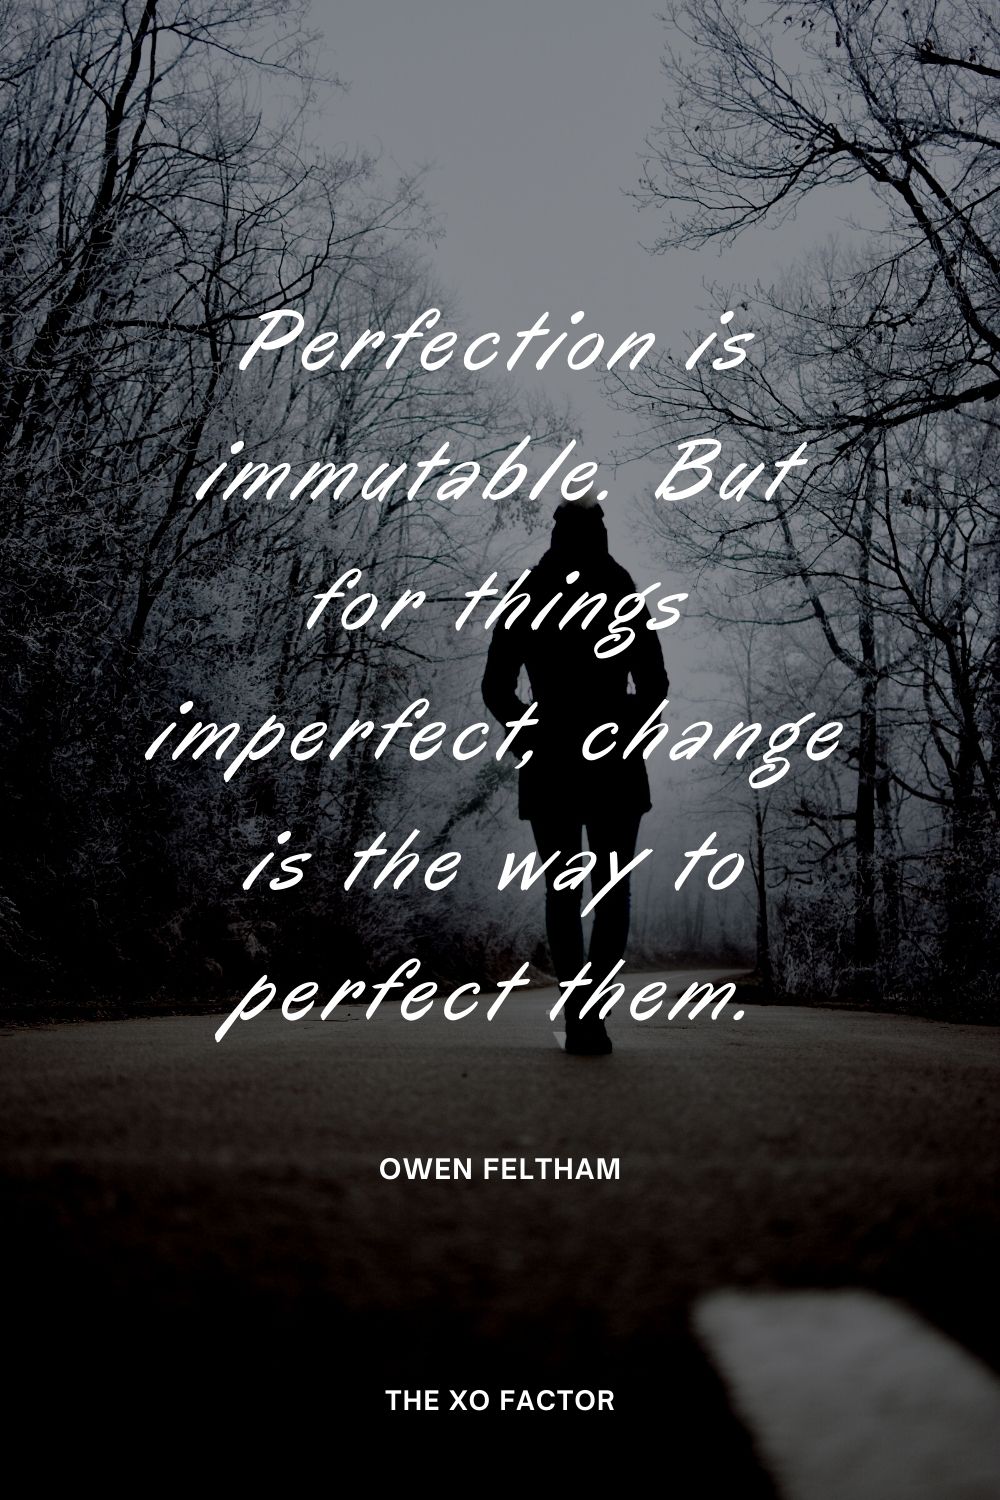 Perfection is immutable. But for things imperfect, change is the way to perfect them.